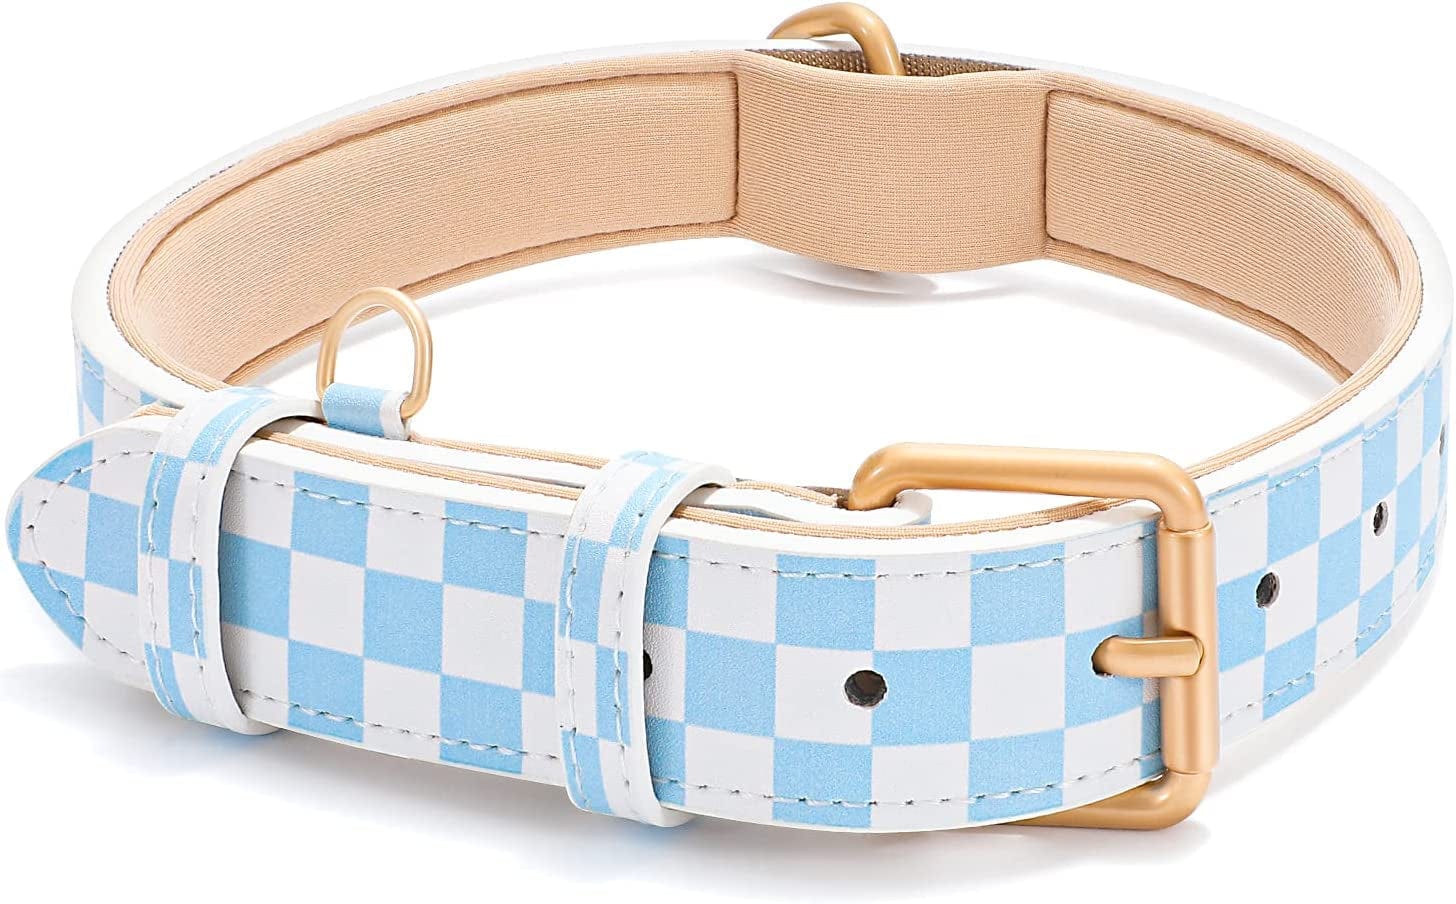 WHIPPY Airtag Leather Dog Collar GPS Tracker Air Tag Puppy Collar Adjustable Soft Leather Padded Dog Collar with Airtag Holder Case for Small Medium Large Dog Pet Backpack,Pink,M Electronics > GPS Accessories > GPS Cases WHIPPY H-blue/white square XS:Neck 9"-13",Width 0.6" 